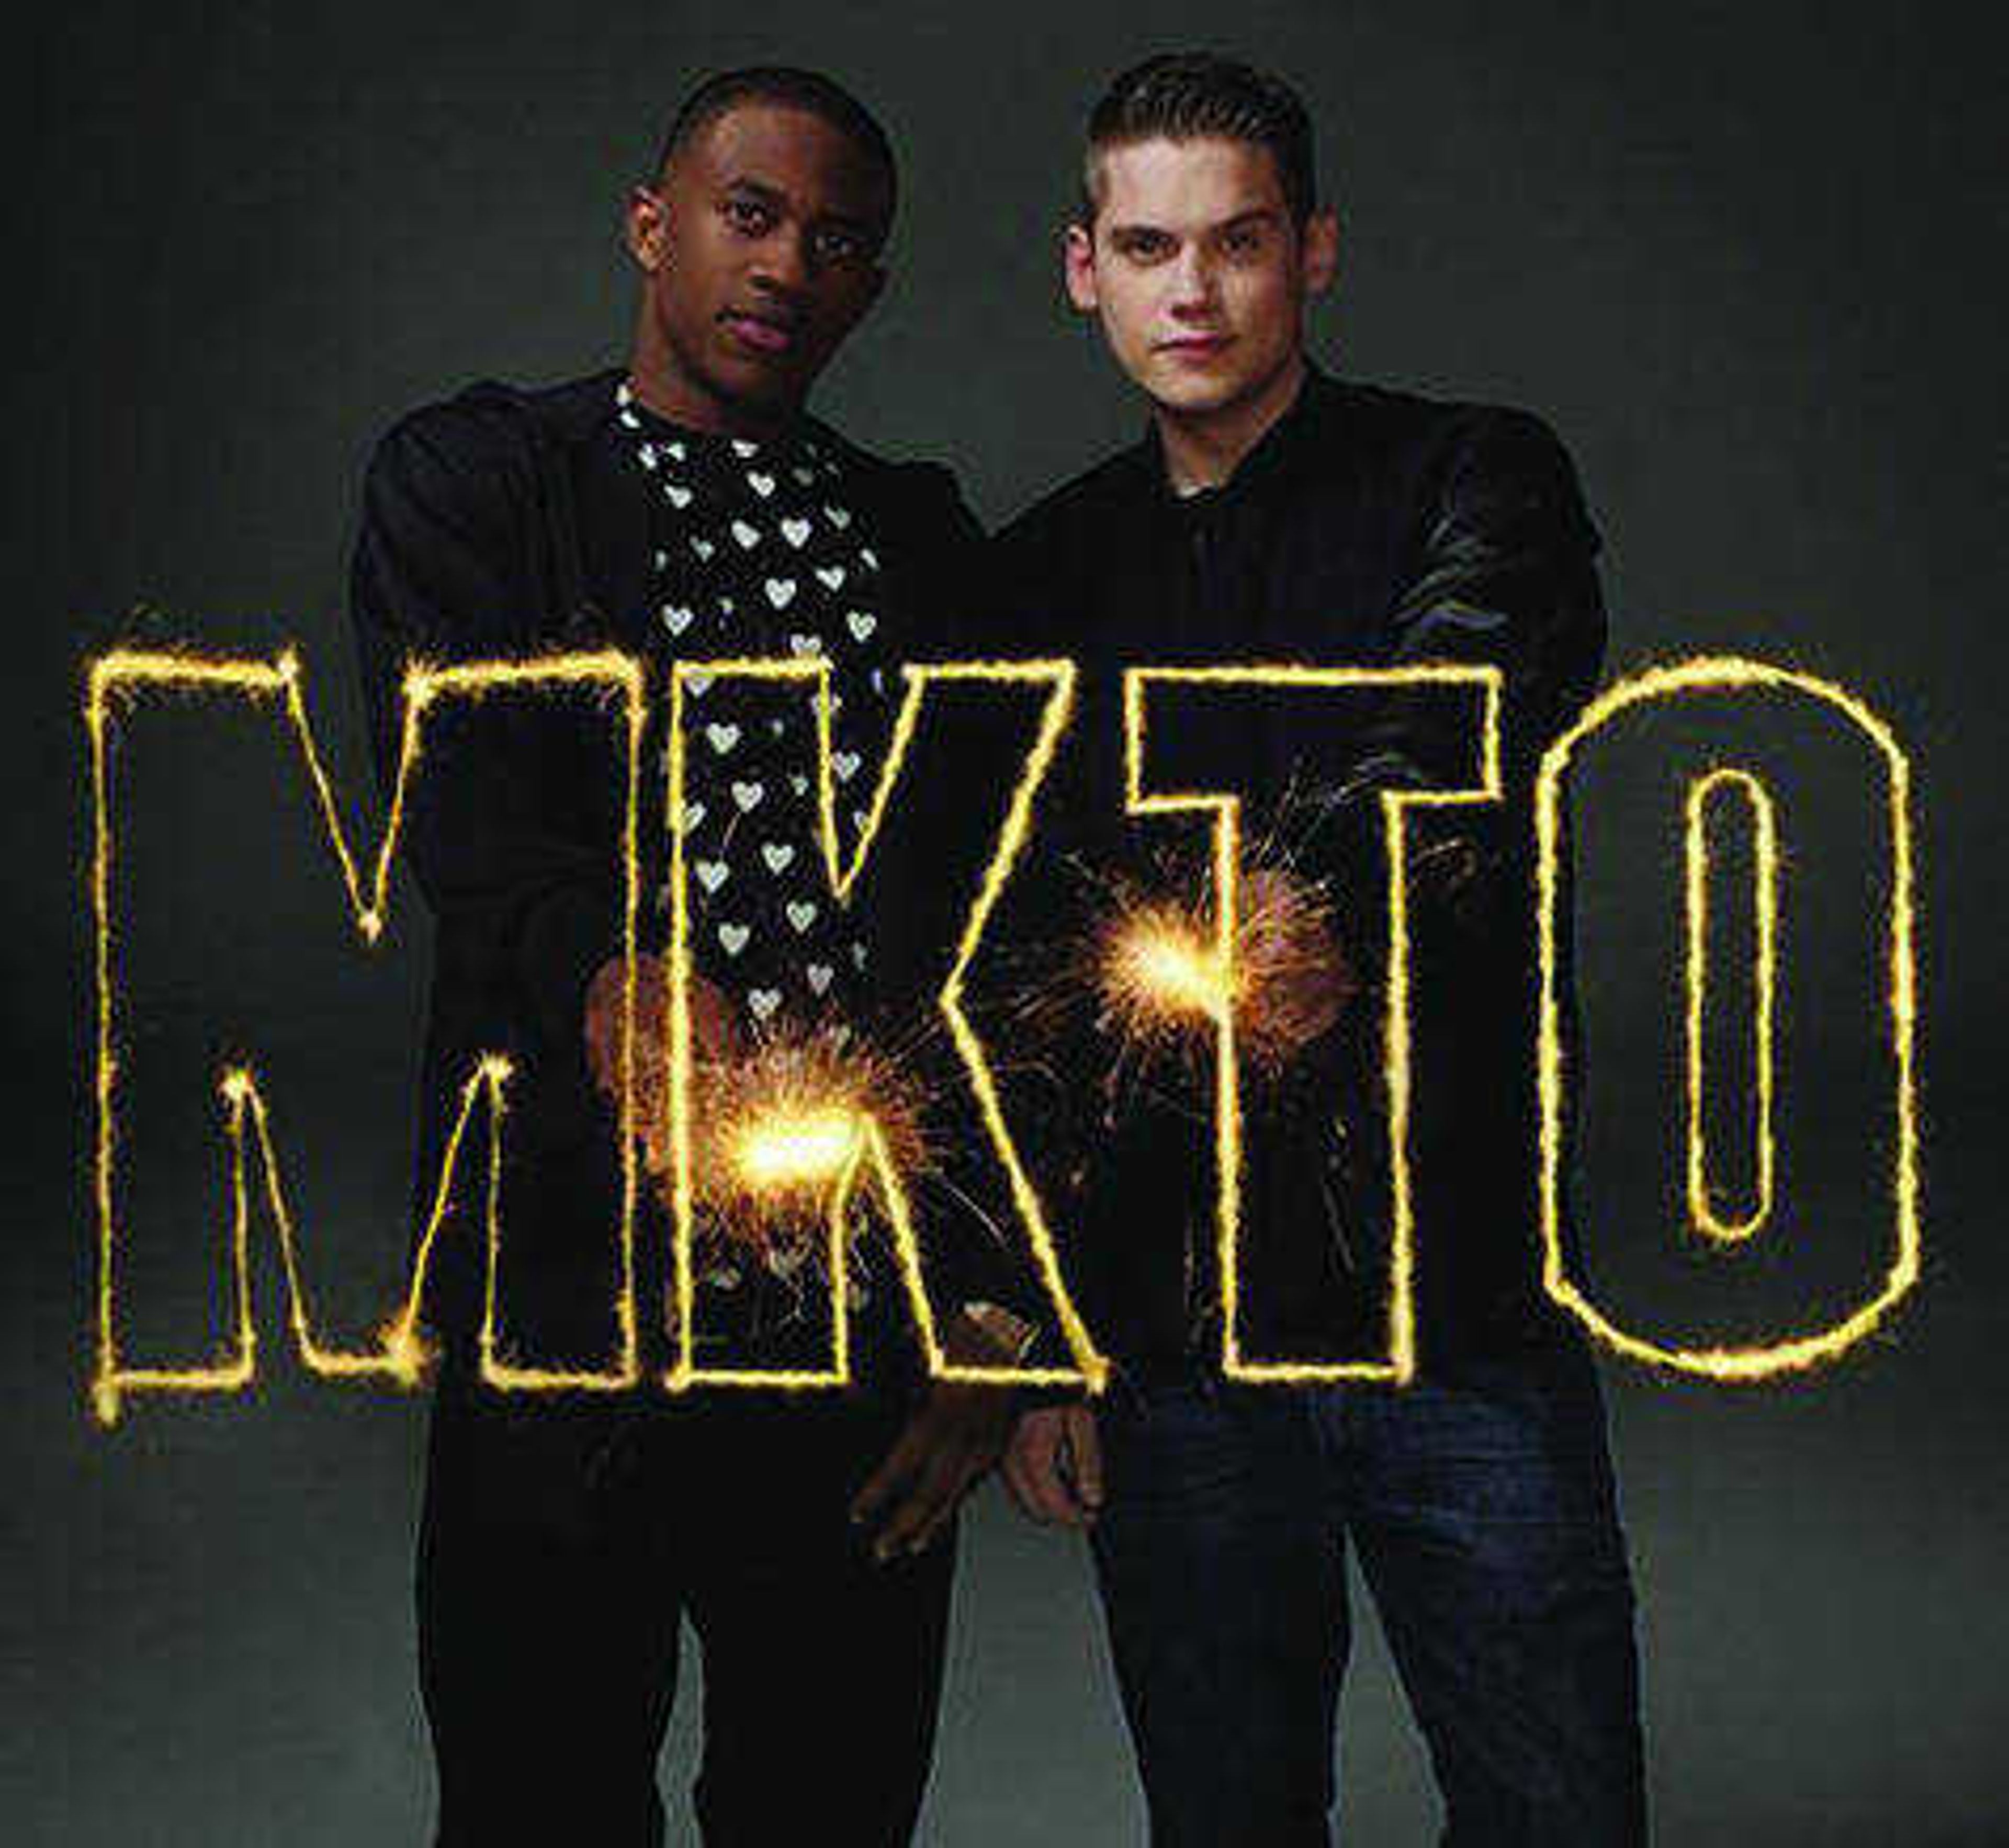 Student Activities Council will host MKTO in concert at 7:30 p.m. March 28 at the Show Me Center. Submitted photo